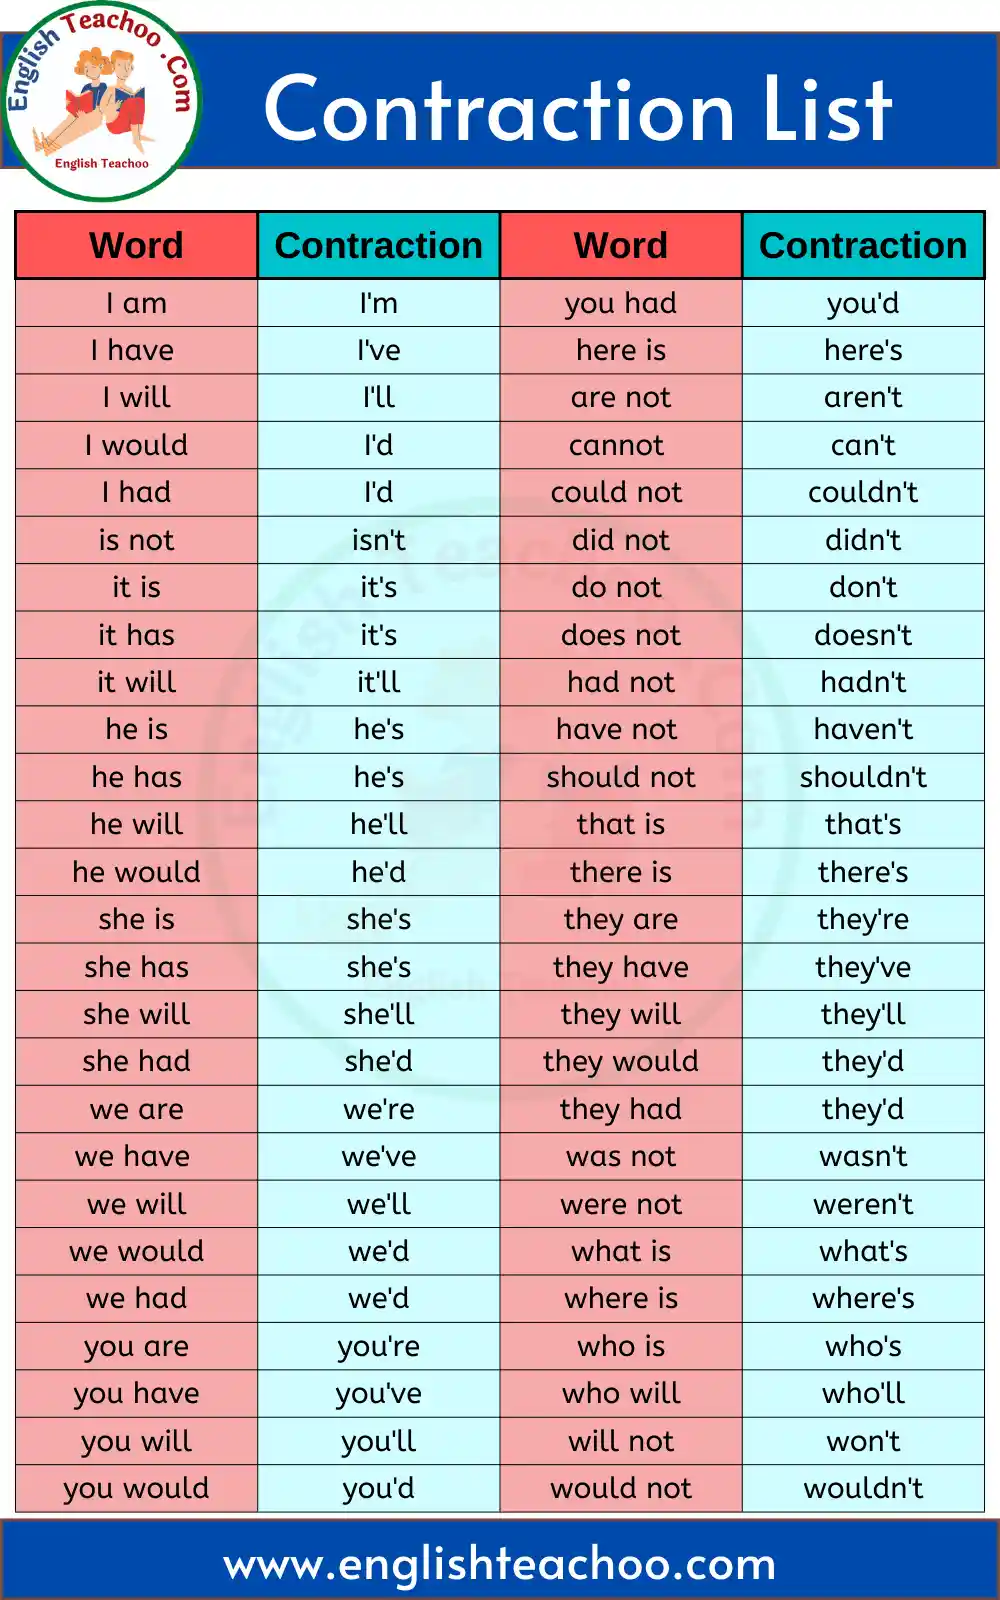 List of Contraction Words in English